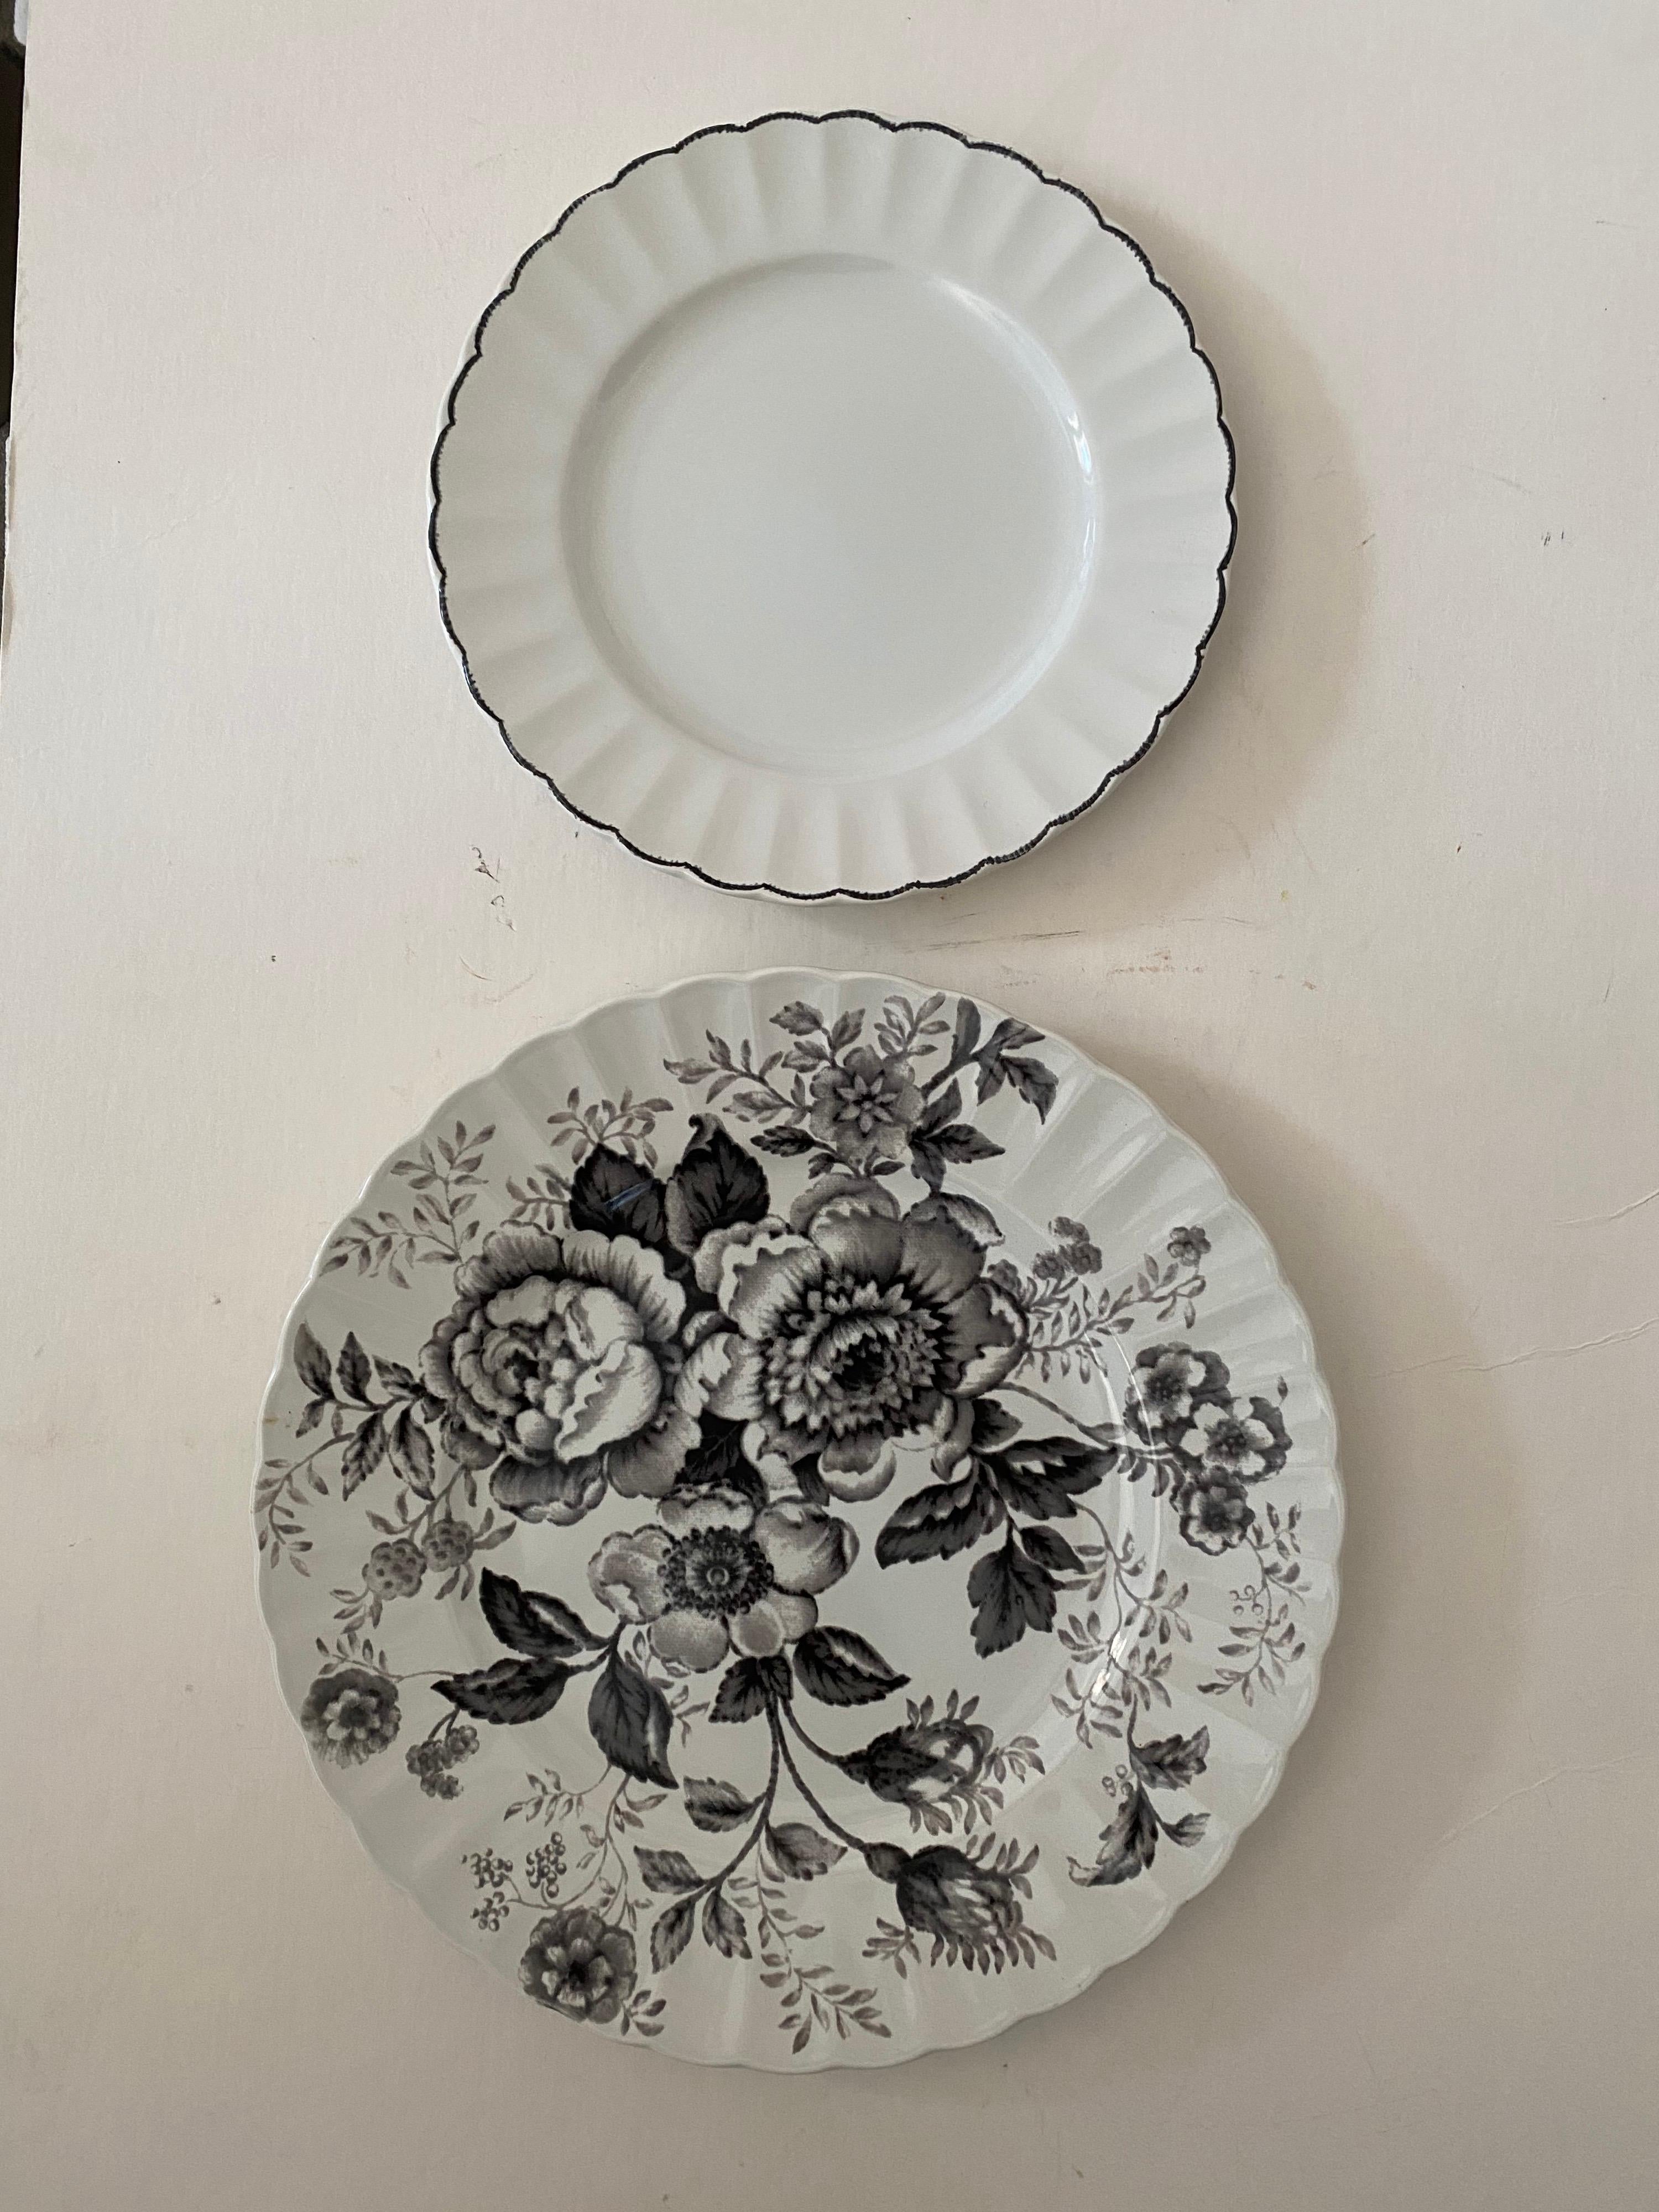 A six (6) piece dinnerware set by Lauren/Ralph Lauren Home in the coordinating Morning Garden and Featherstitch patterns.

Details:
*Scalloped edge
*Signed
*Ceramic ironstone 
*Black pattern on white
*Dinner plate size: 10” W, Salad plate